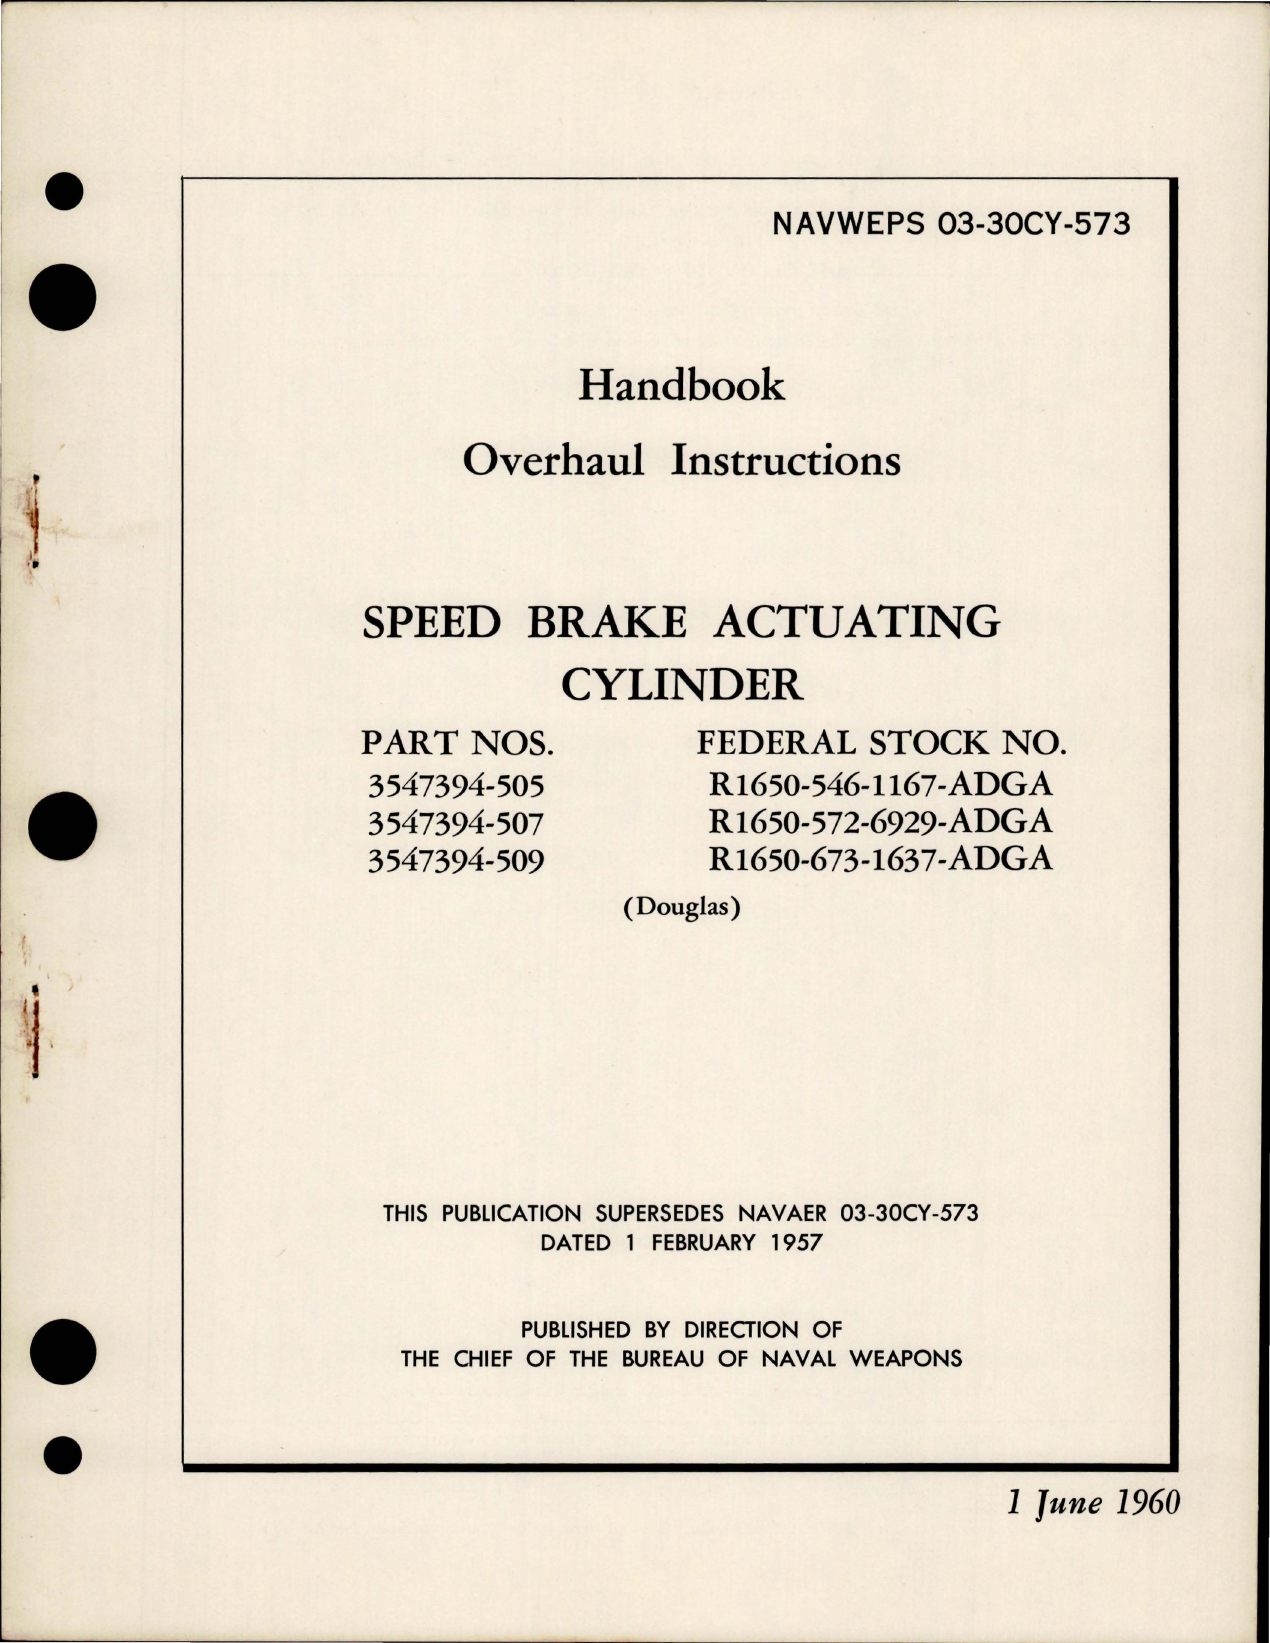 Sample page 1 from AirCorps Library document: Overhaul Instructions for Speed Brake Actuating Cylinder - Parts 3547394-505, 3547394-507, 3547394-509 